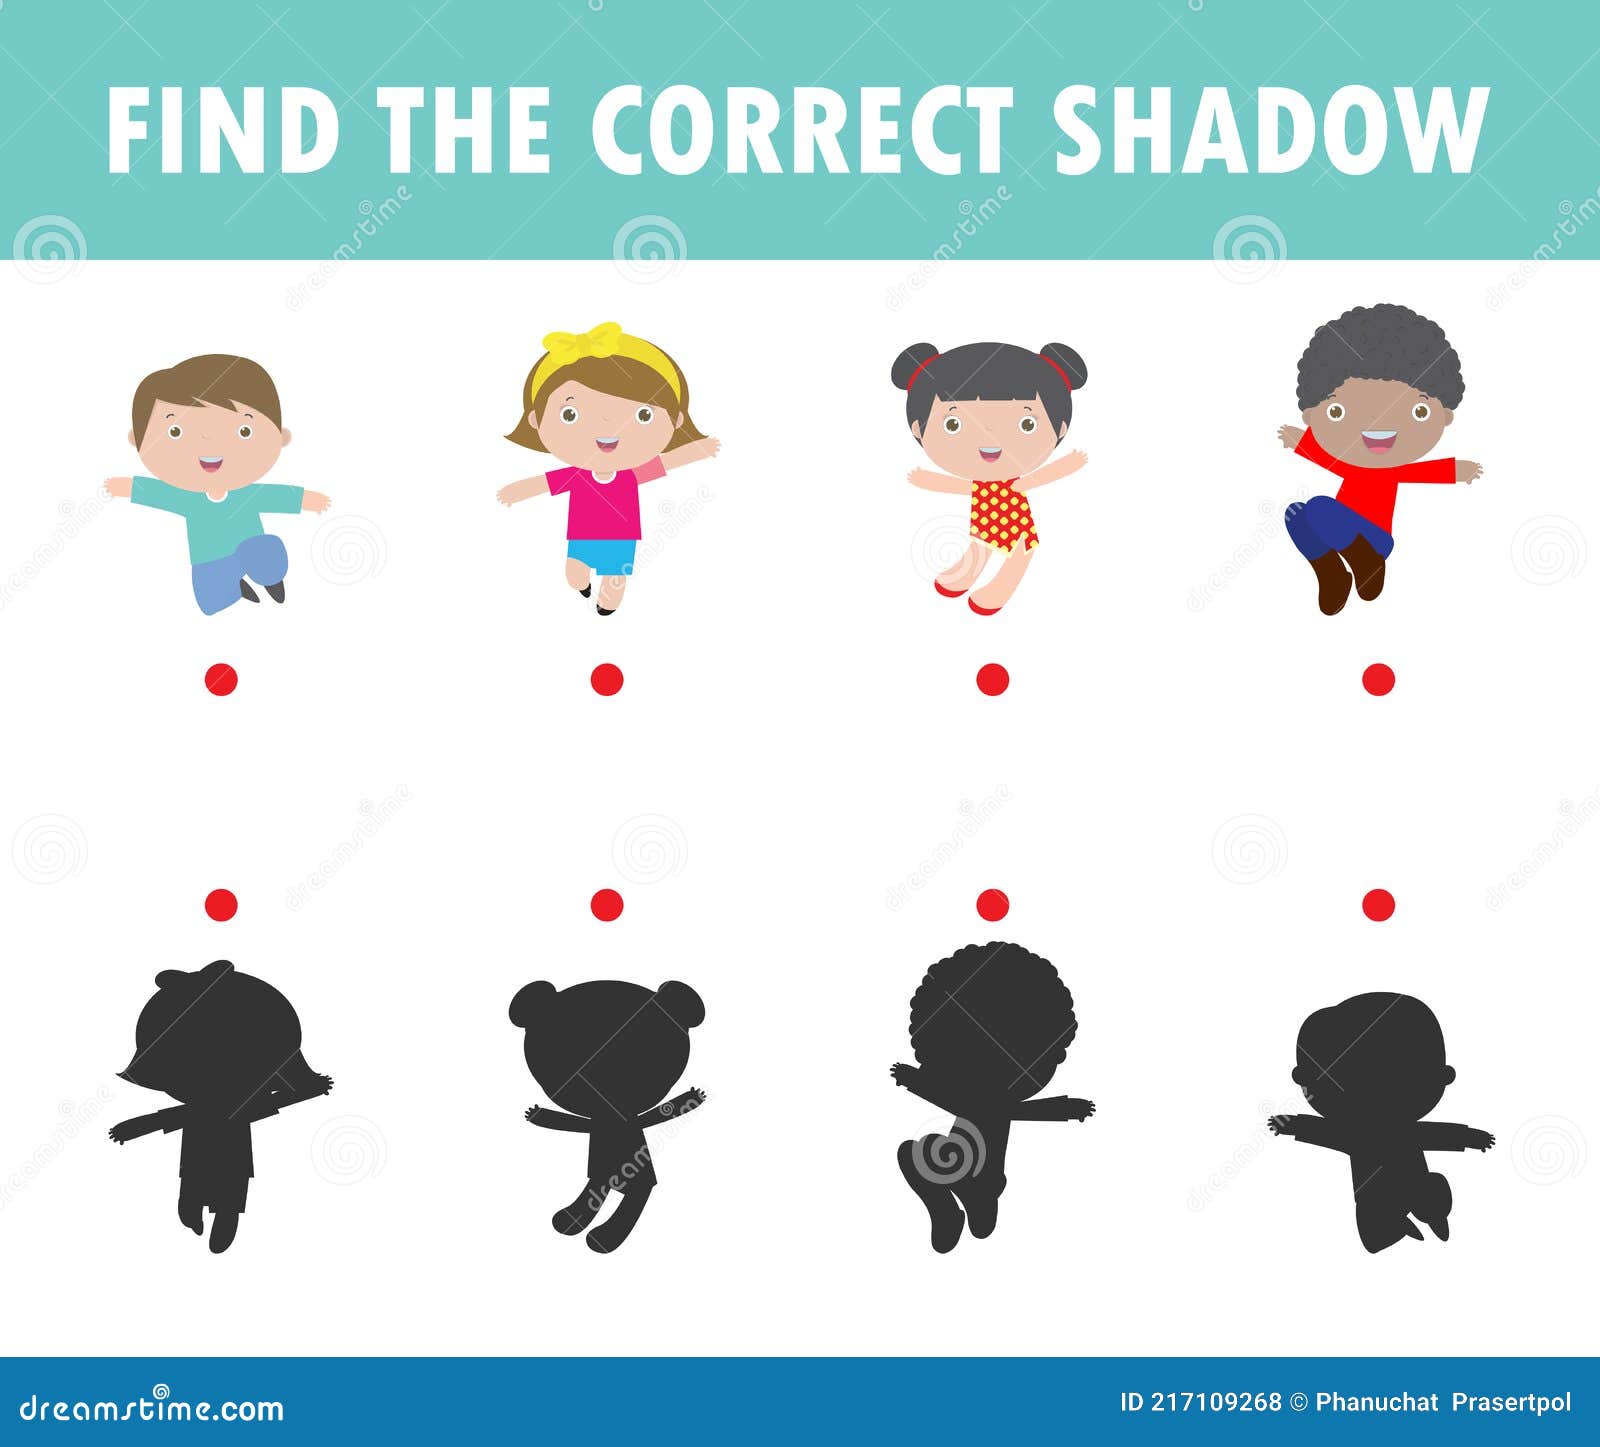 shadow matching game for kids, visual game for kid, find the correct shadow, instructional media, connect the dots picture